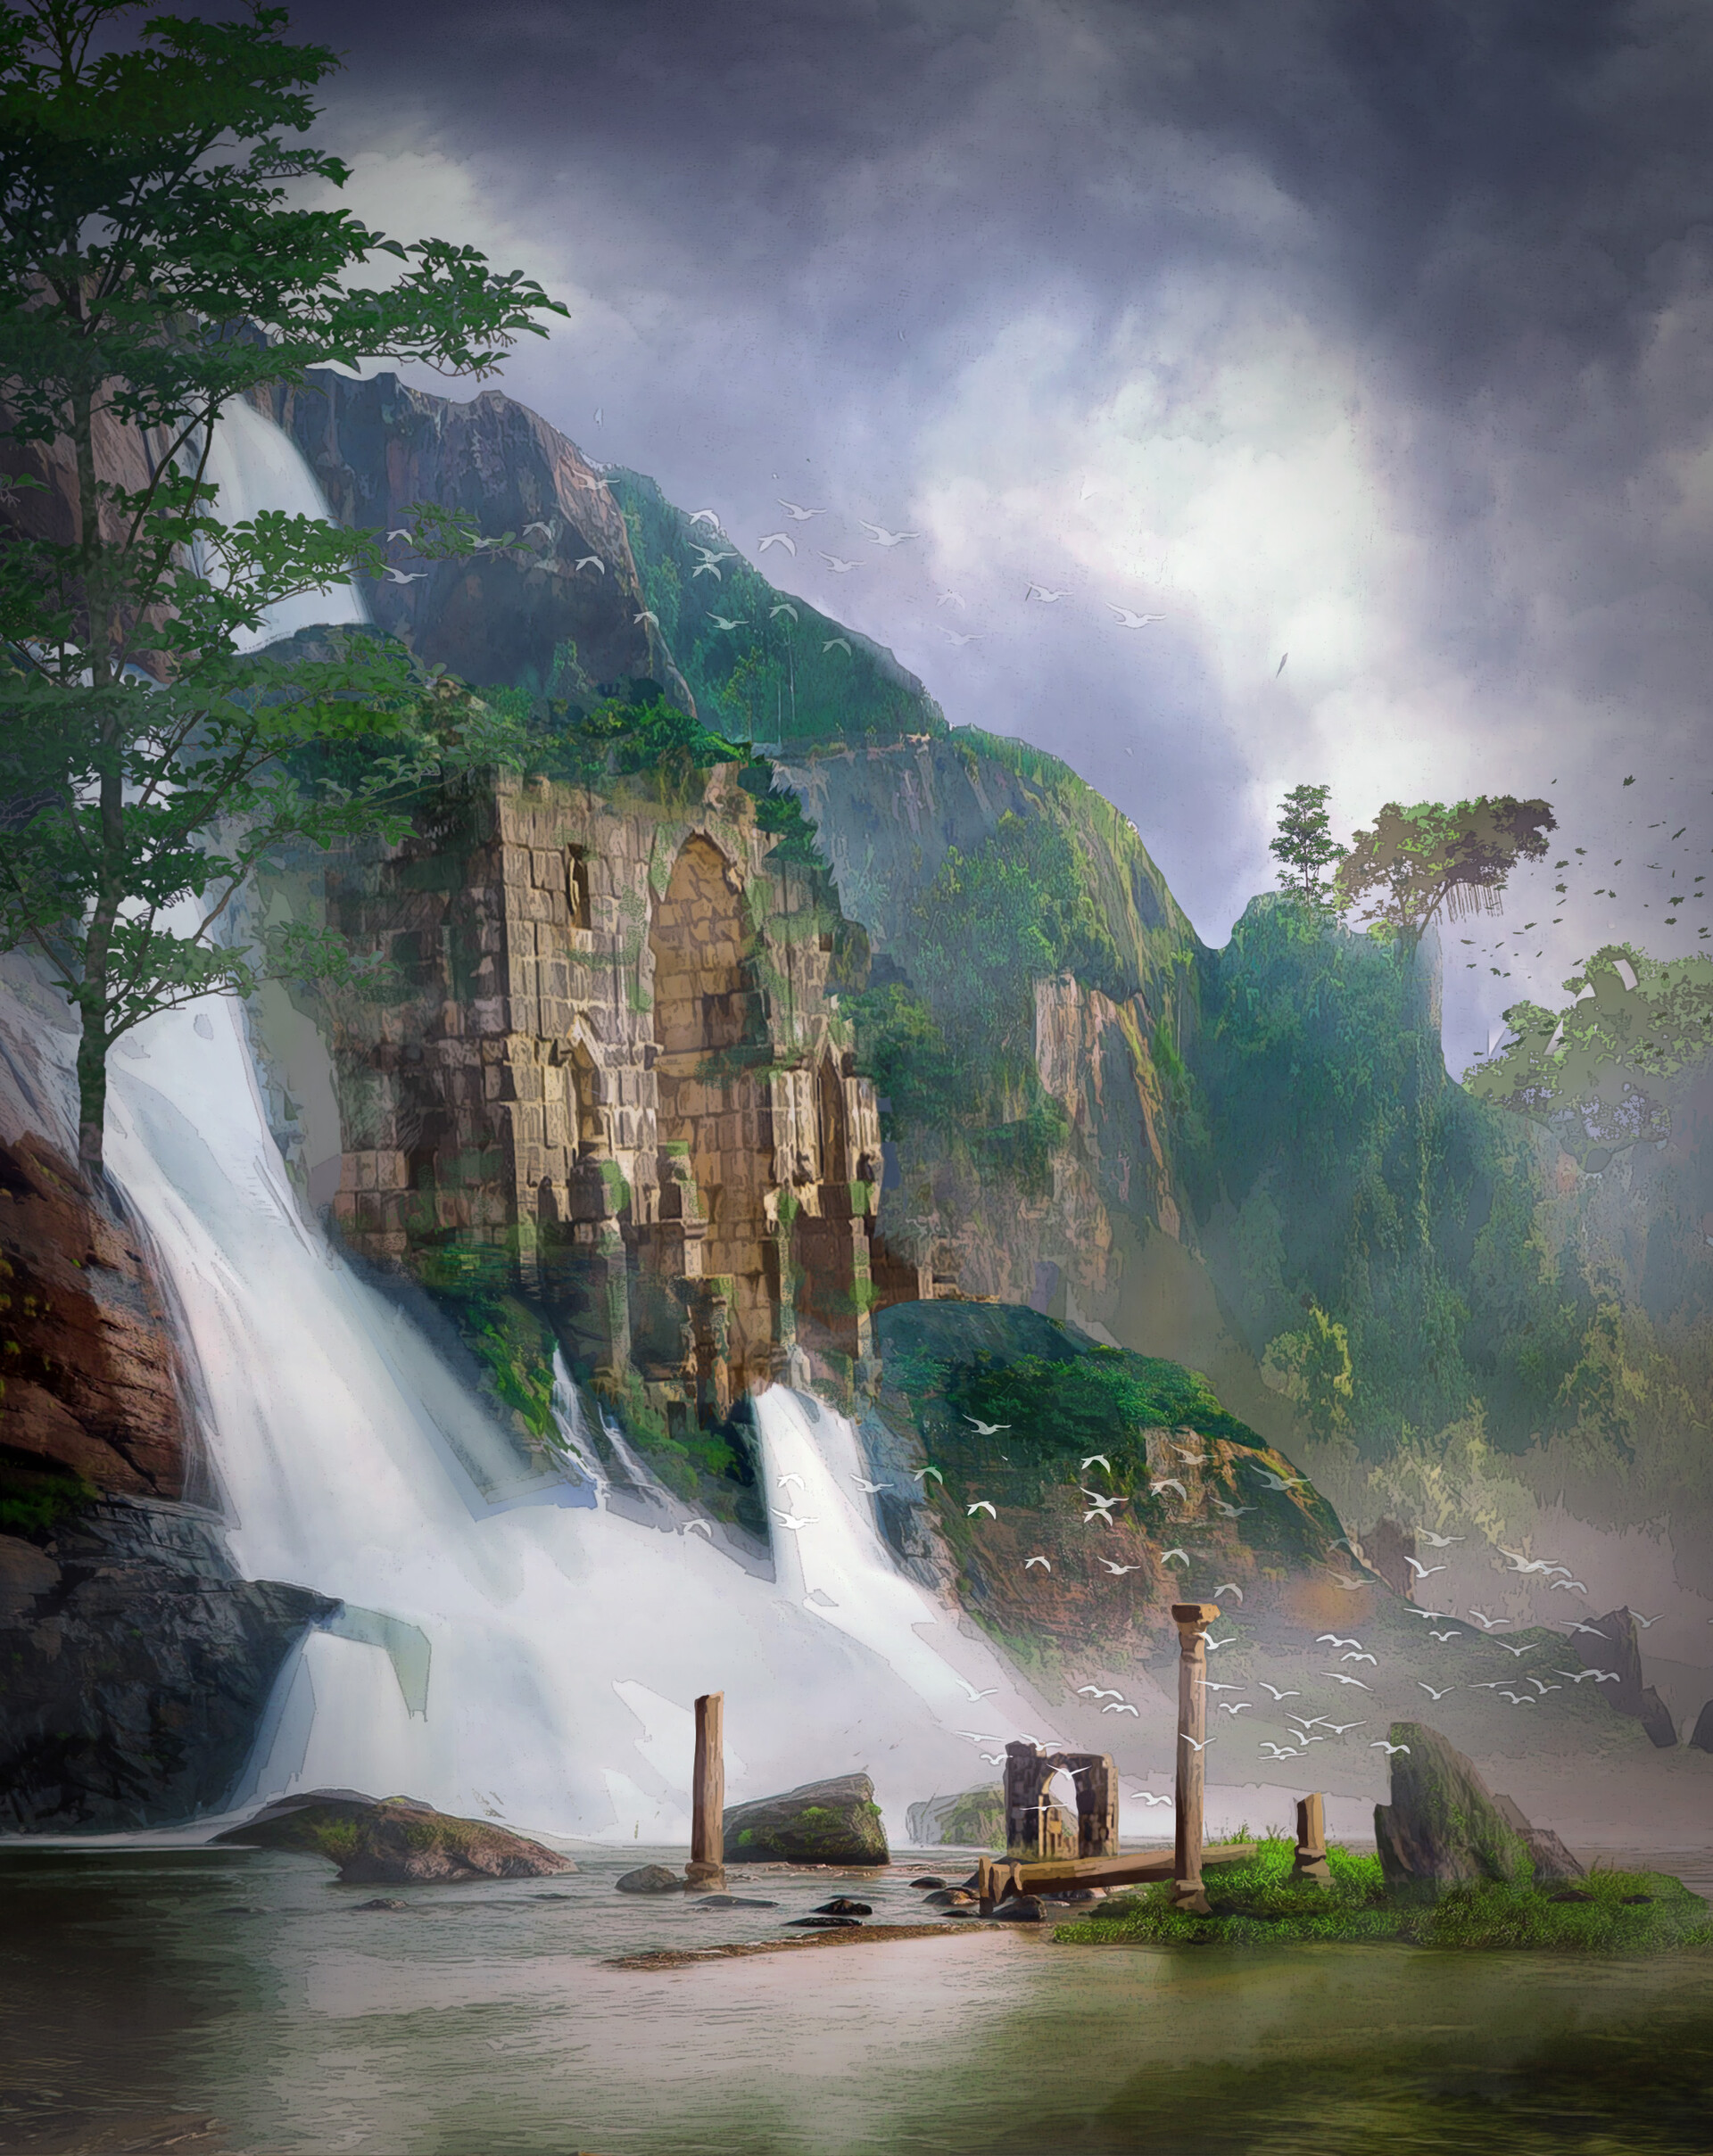 The Ruins and Waterfall by ItzMino on DeviantArt